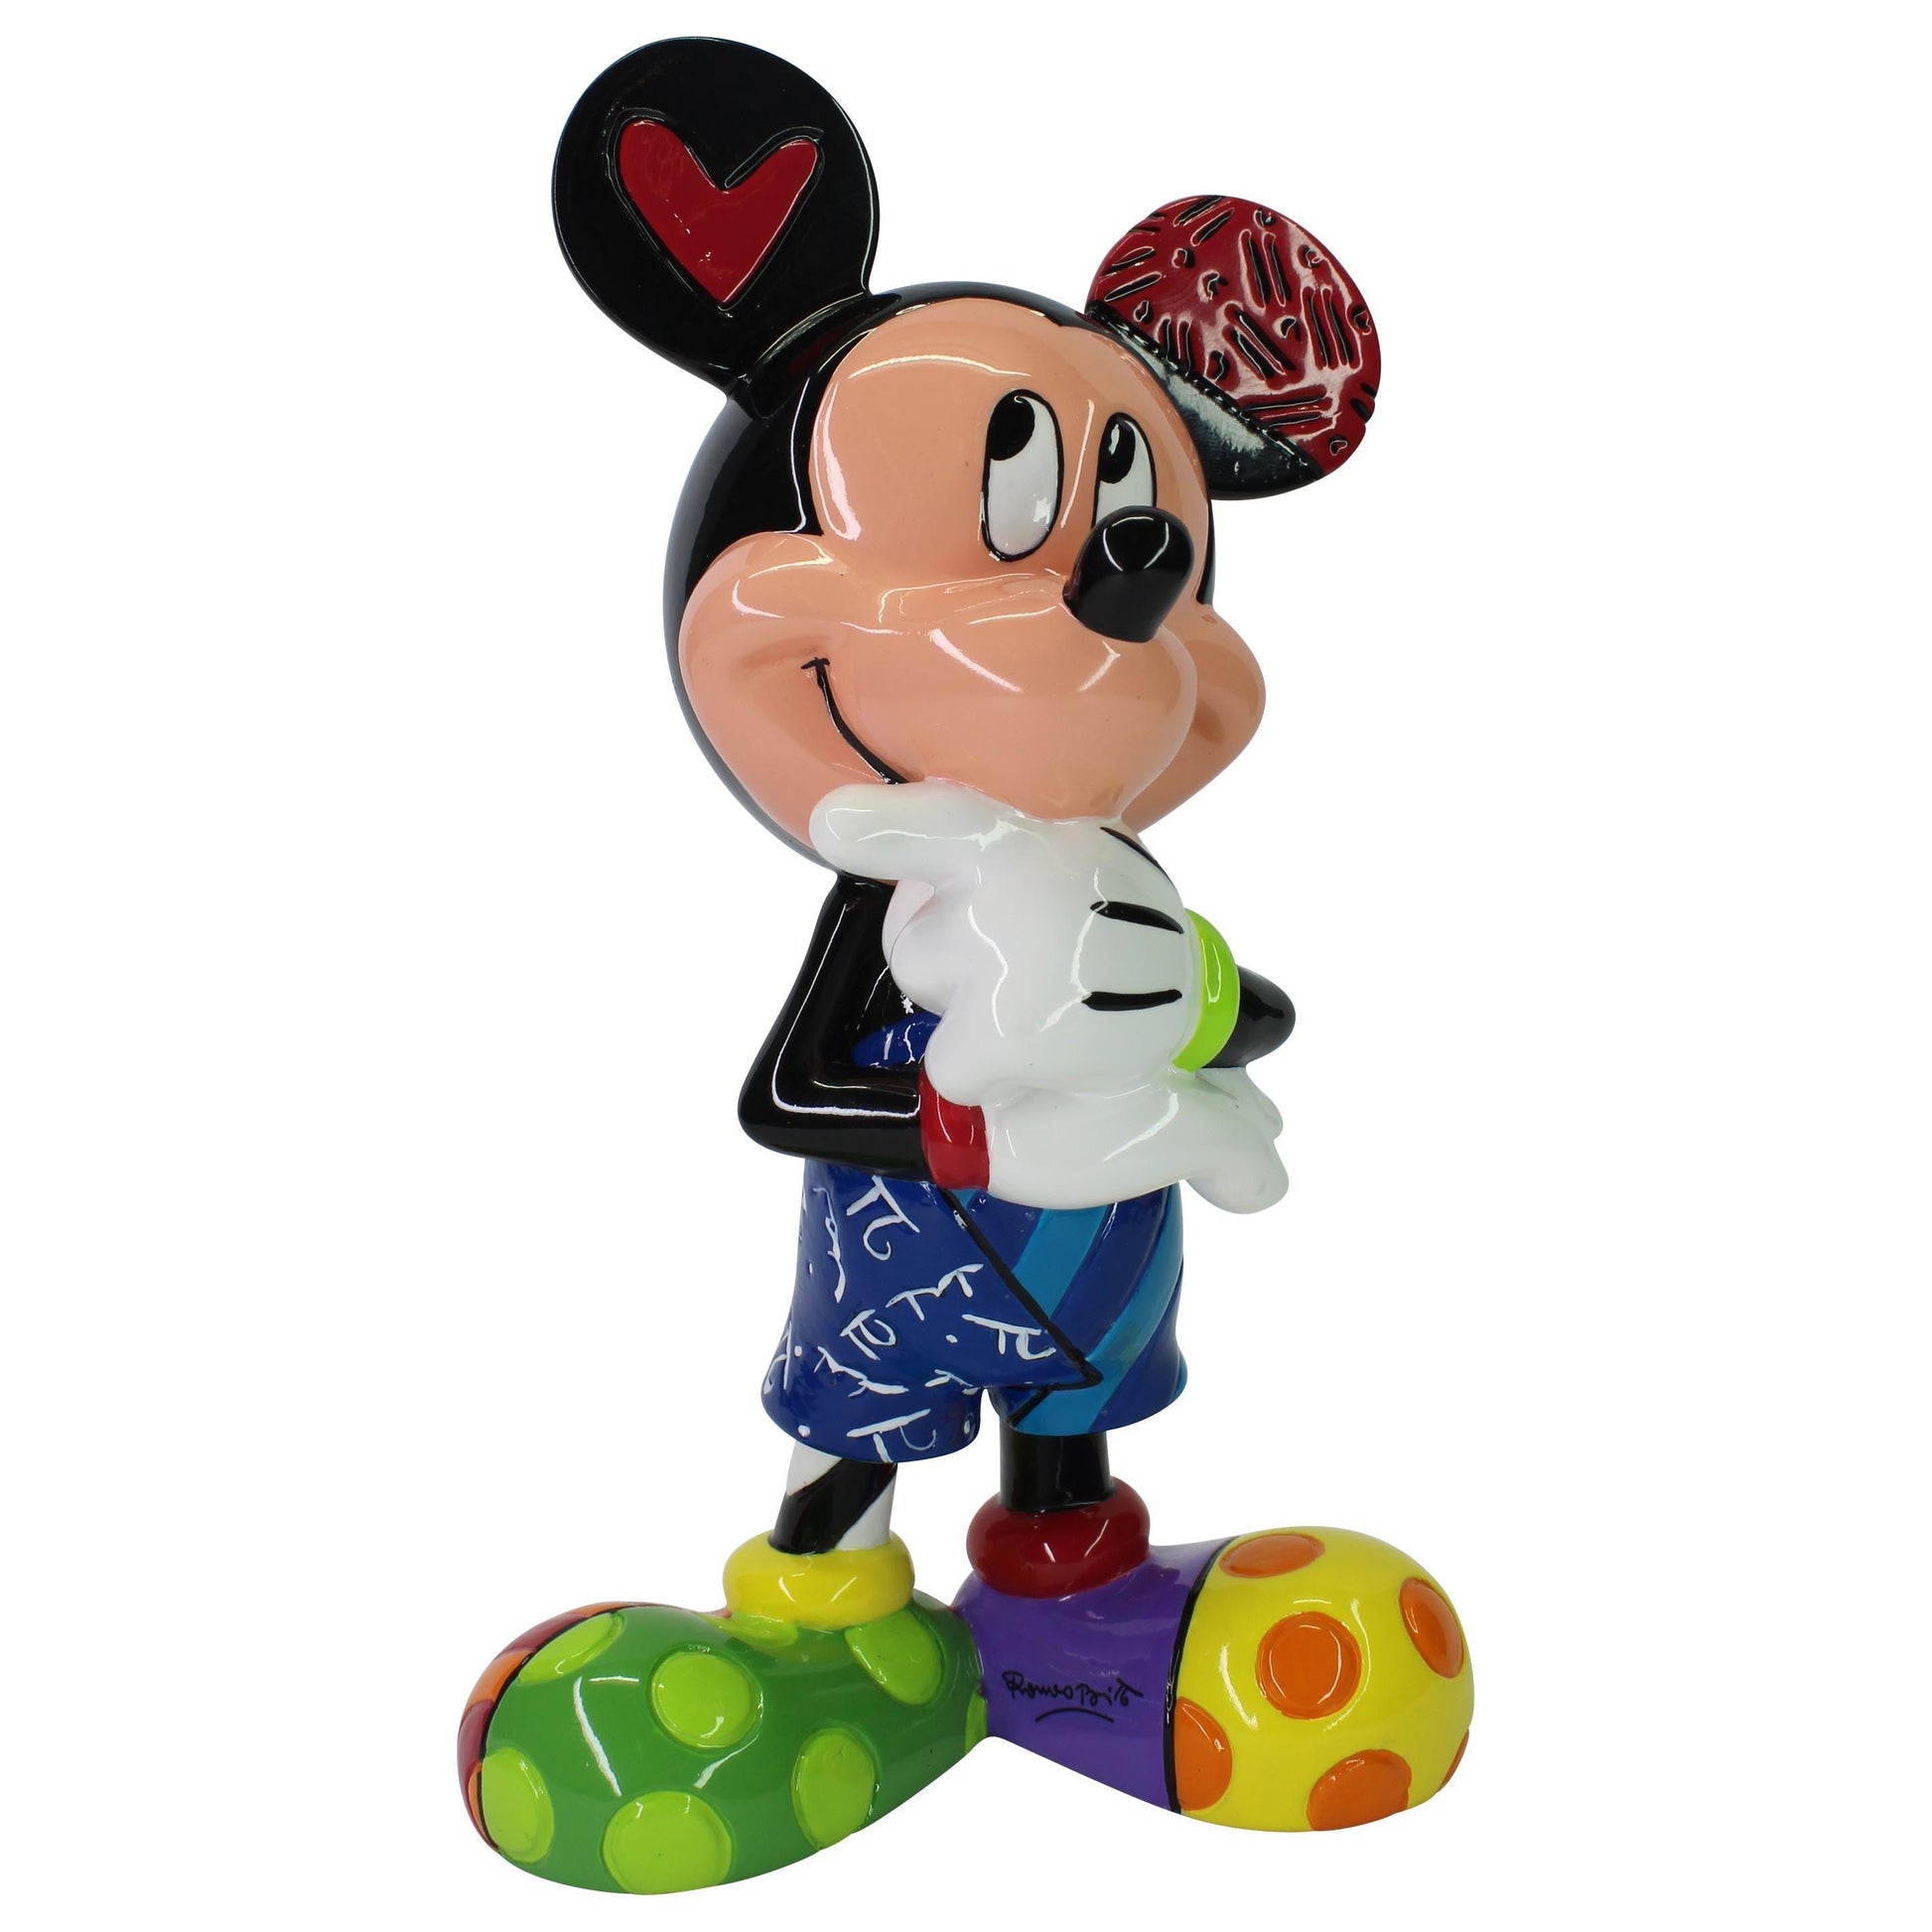 Mickey Mouse Thinking Figurine (Disney Britto Collection) - Gallery Gifts Online 